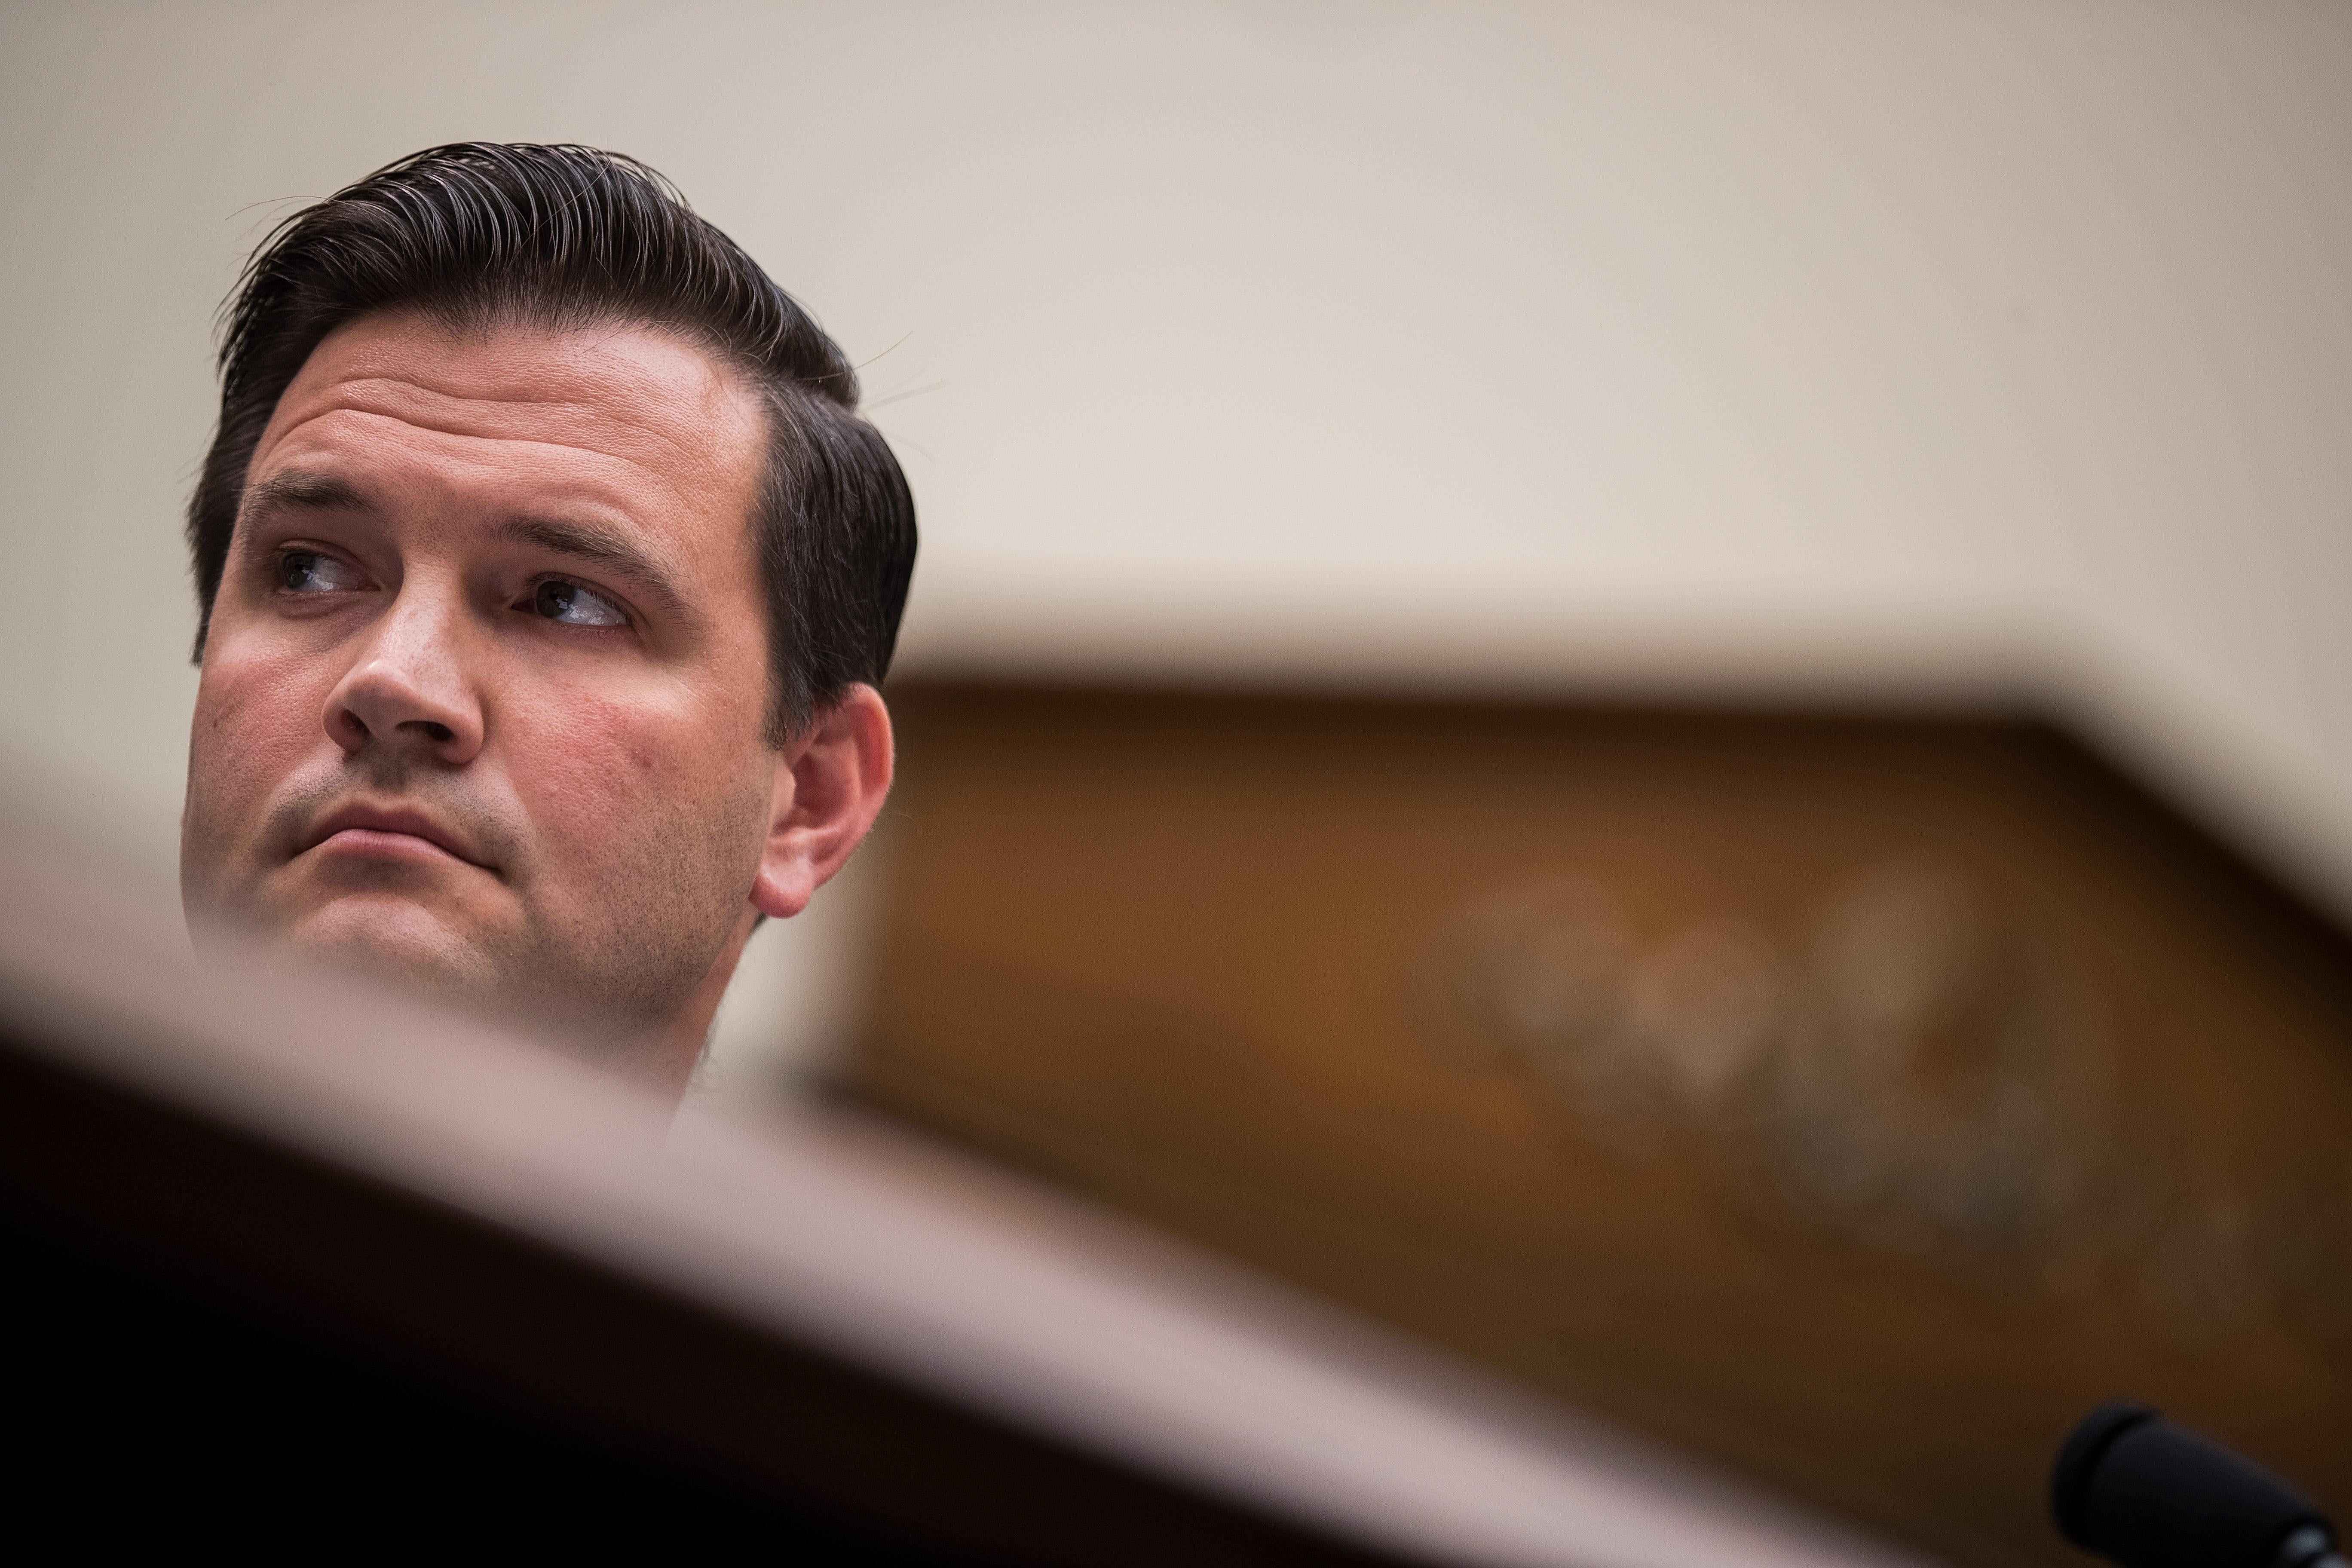 Scott Lloyd, director of the Office of Refugee Resettlement at the U.S. Department of Health and Human Services, testifies during a House Judiciary Committee on Capitol Hill on Oct. 26 in Washington.